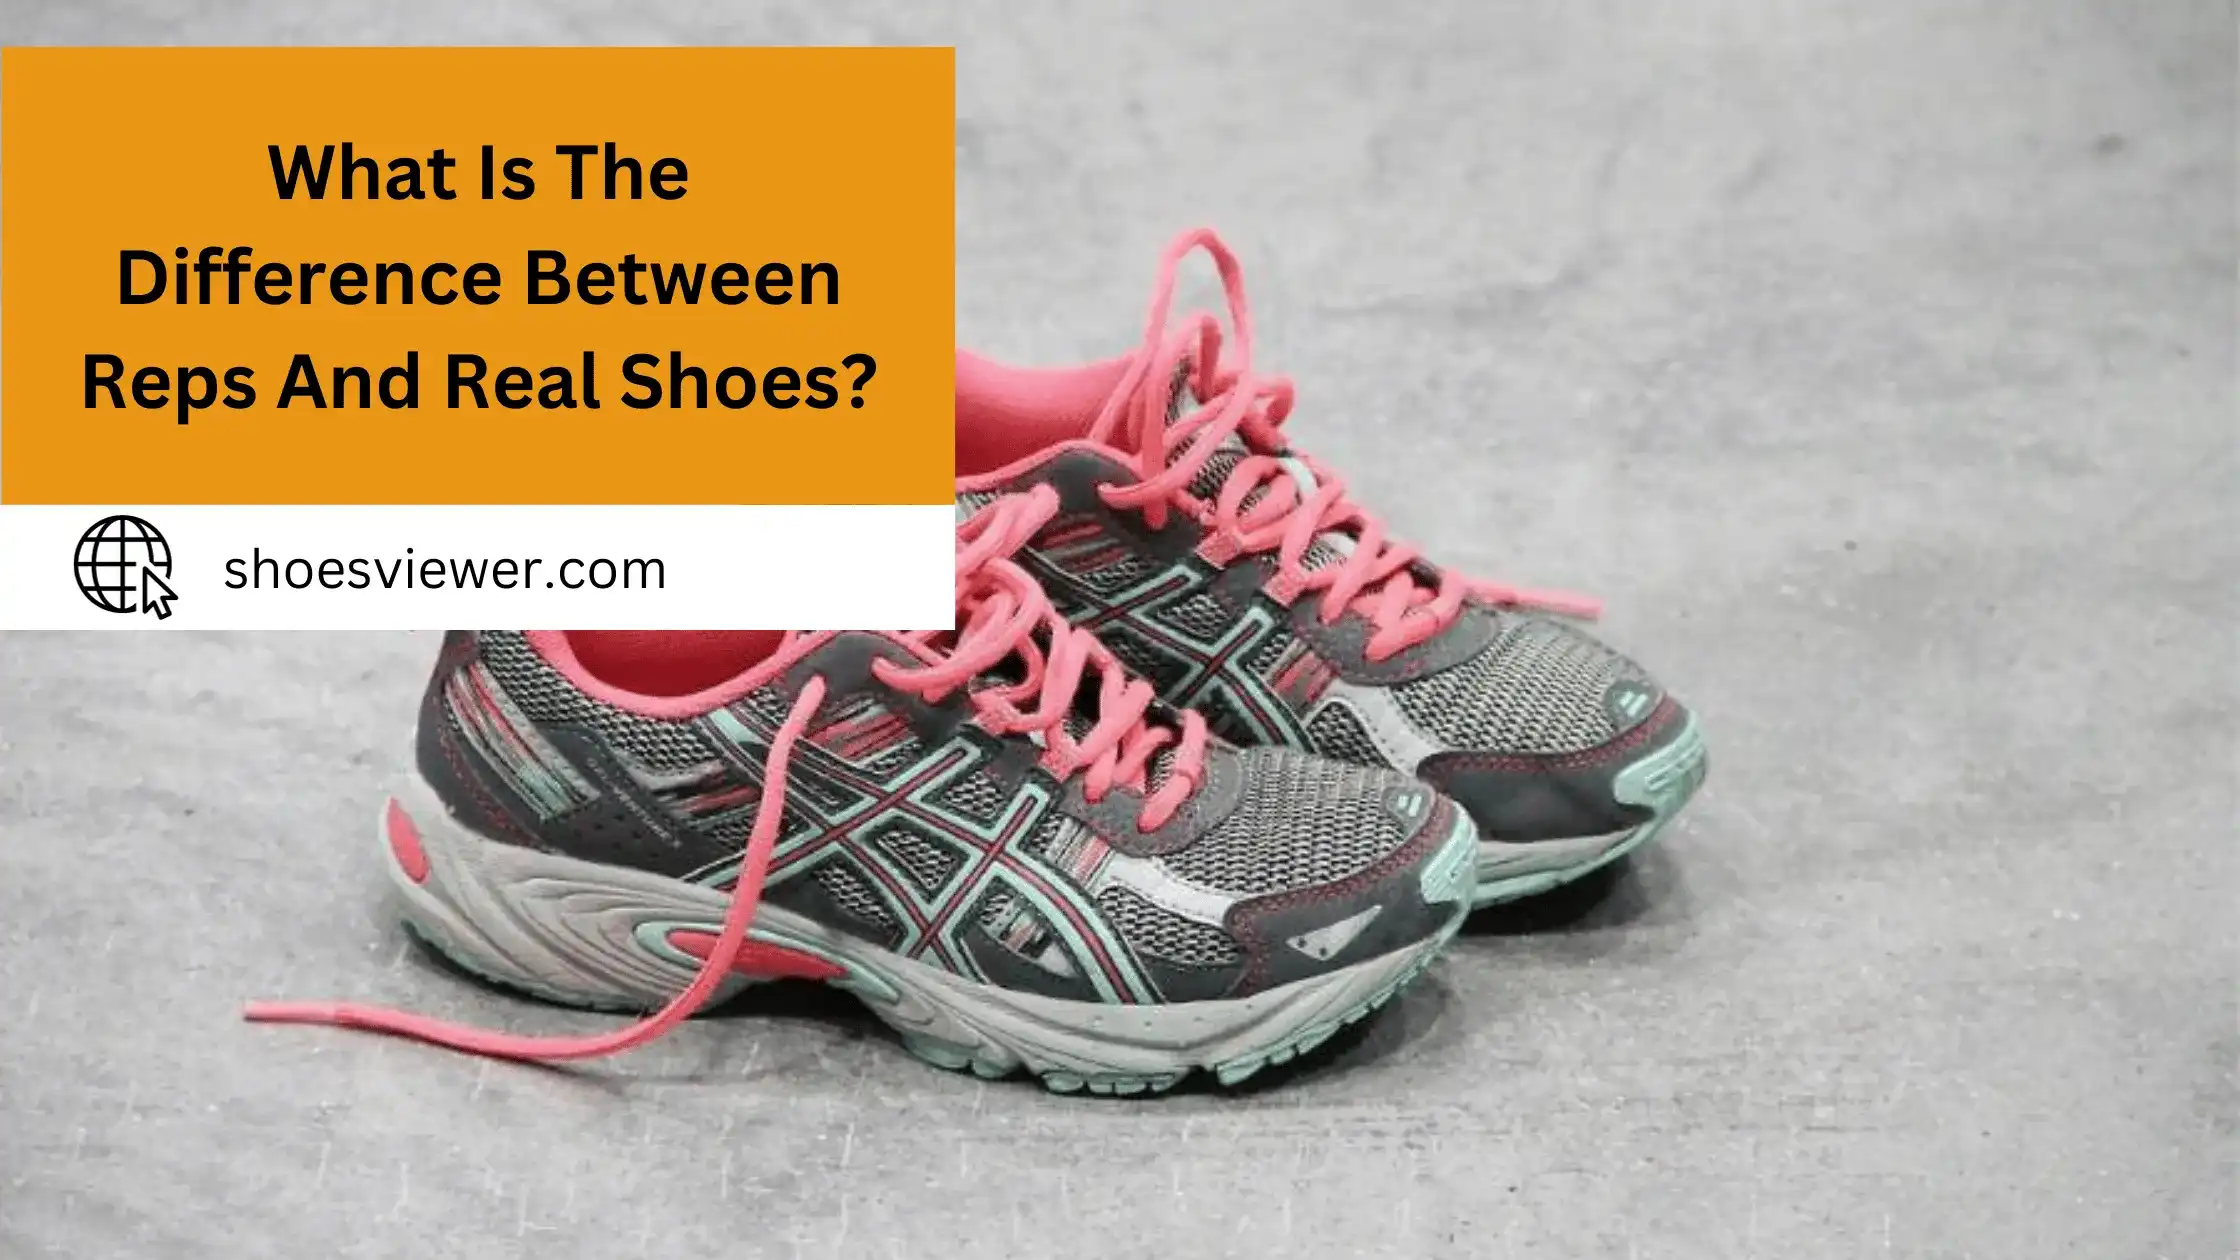 What Is The Difference Between Reps And Real Shoes?